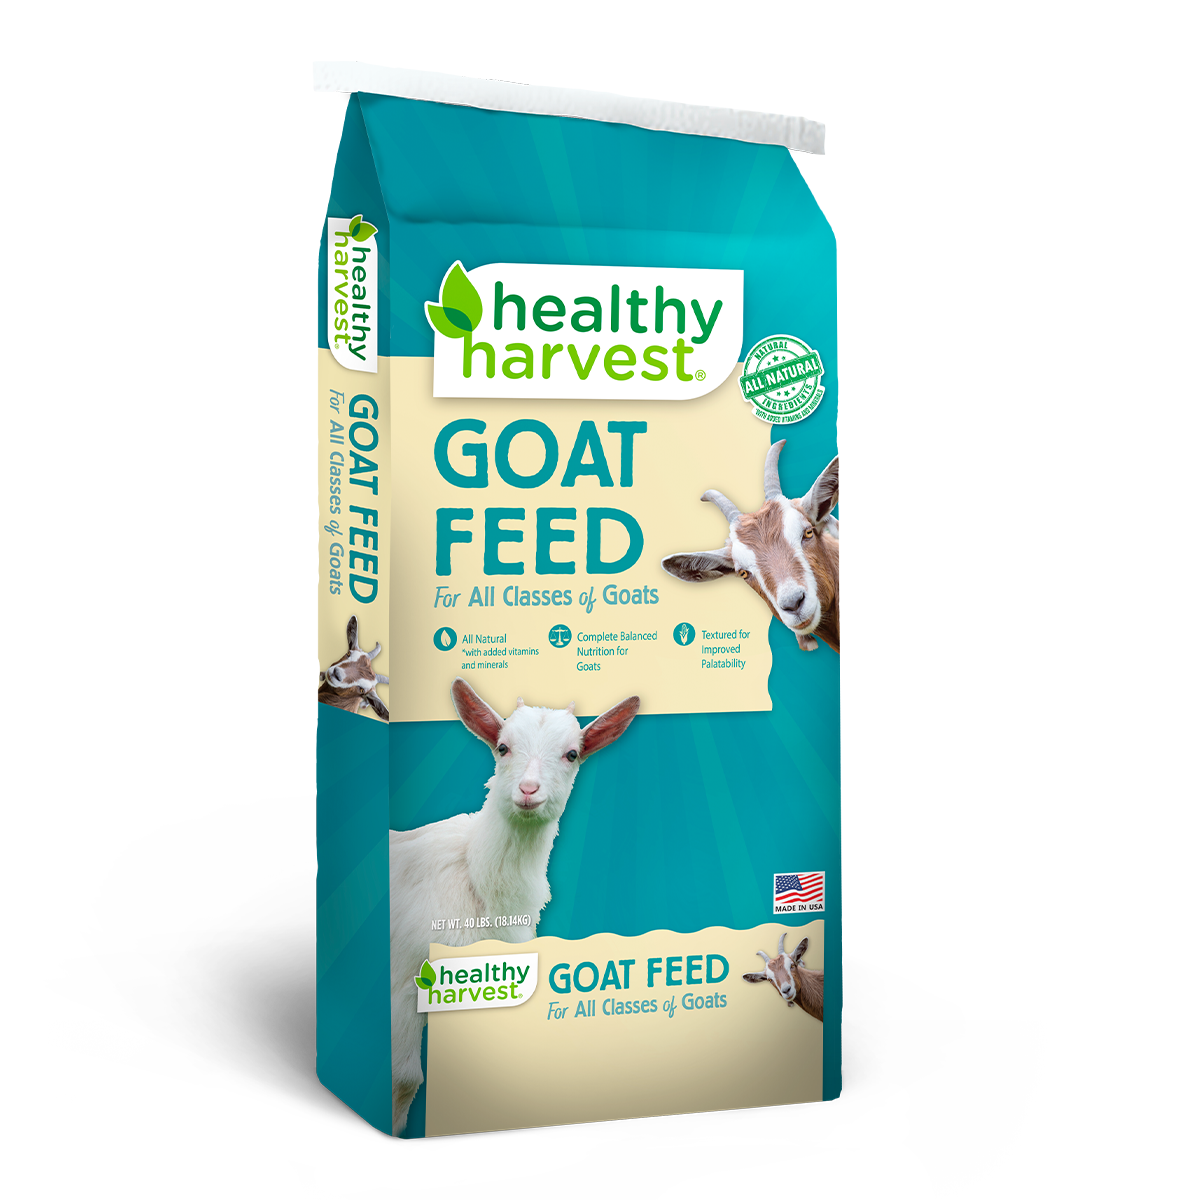 What to feed goats